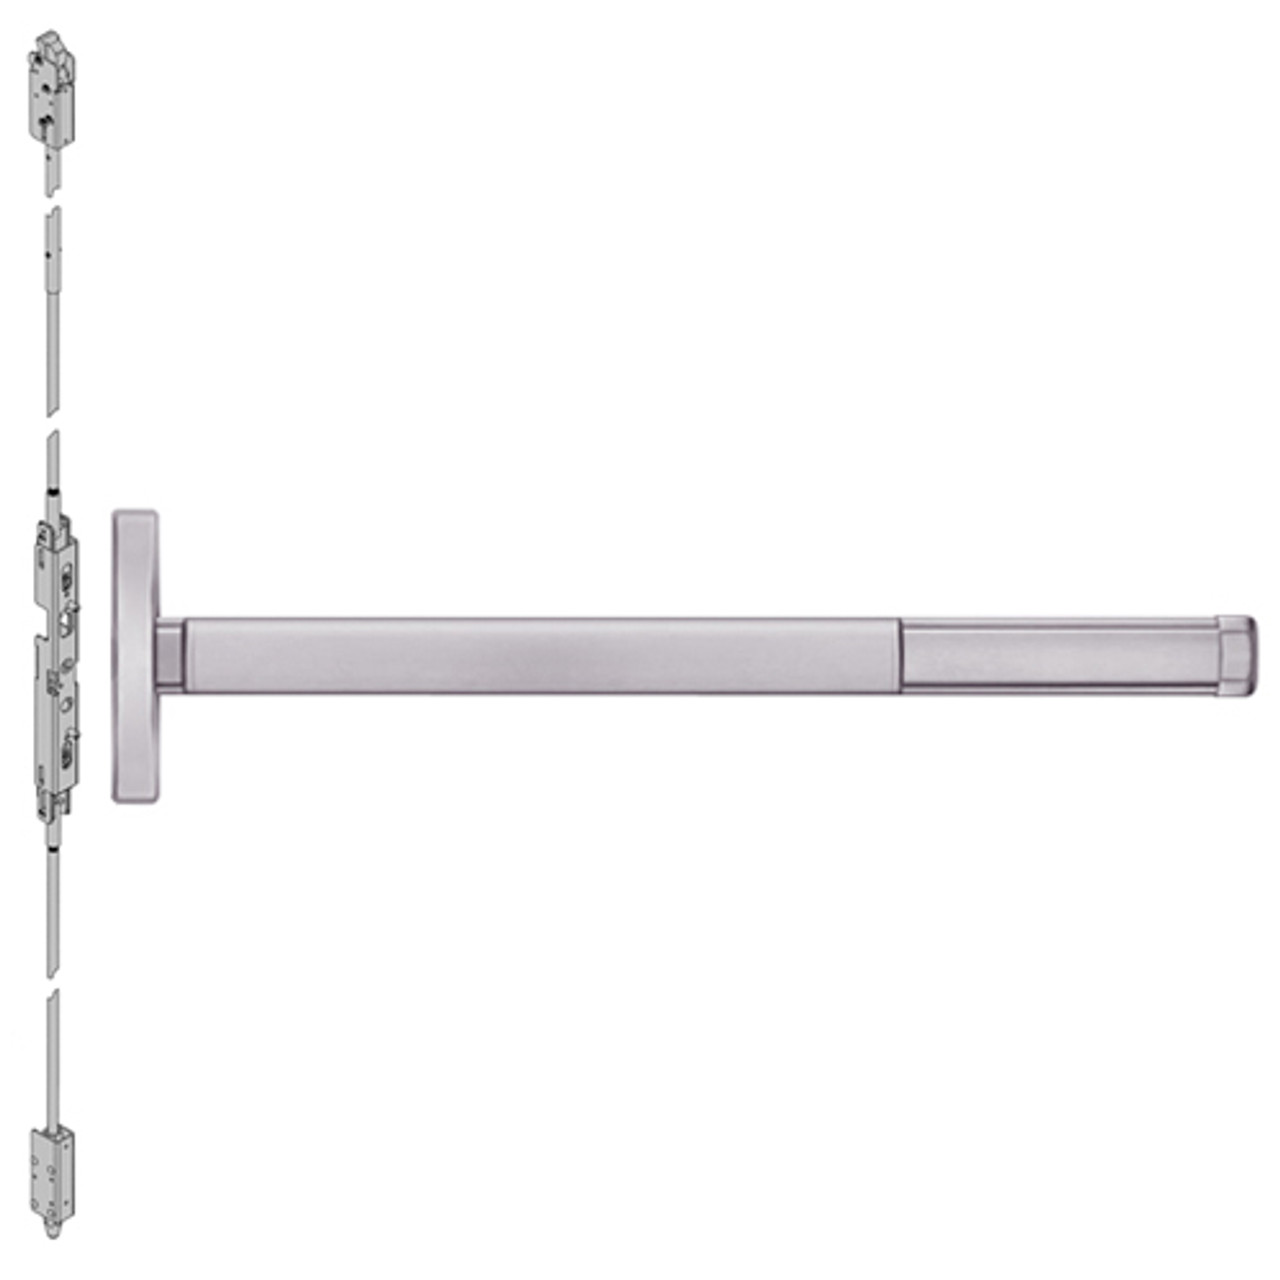 ELR2602-630-36 PHI 2600 Series Concealed Vertical Rod Exit Device with Electric Latch Retraction Prepped for Dummy Trim in Satin Stainless Steel Finish